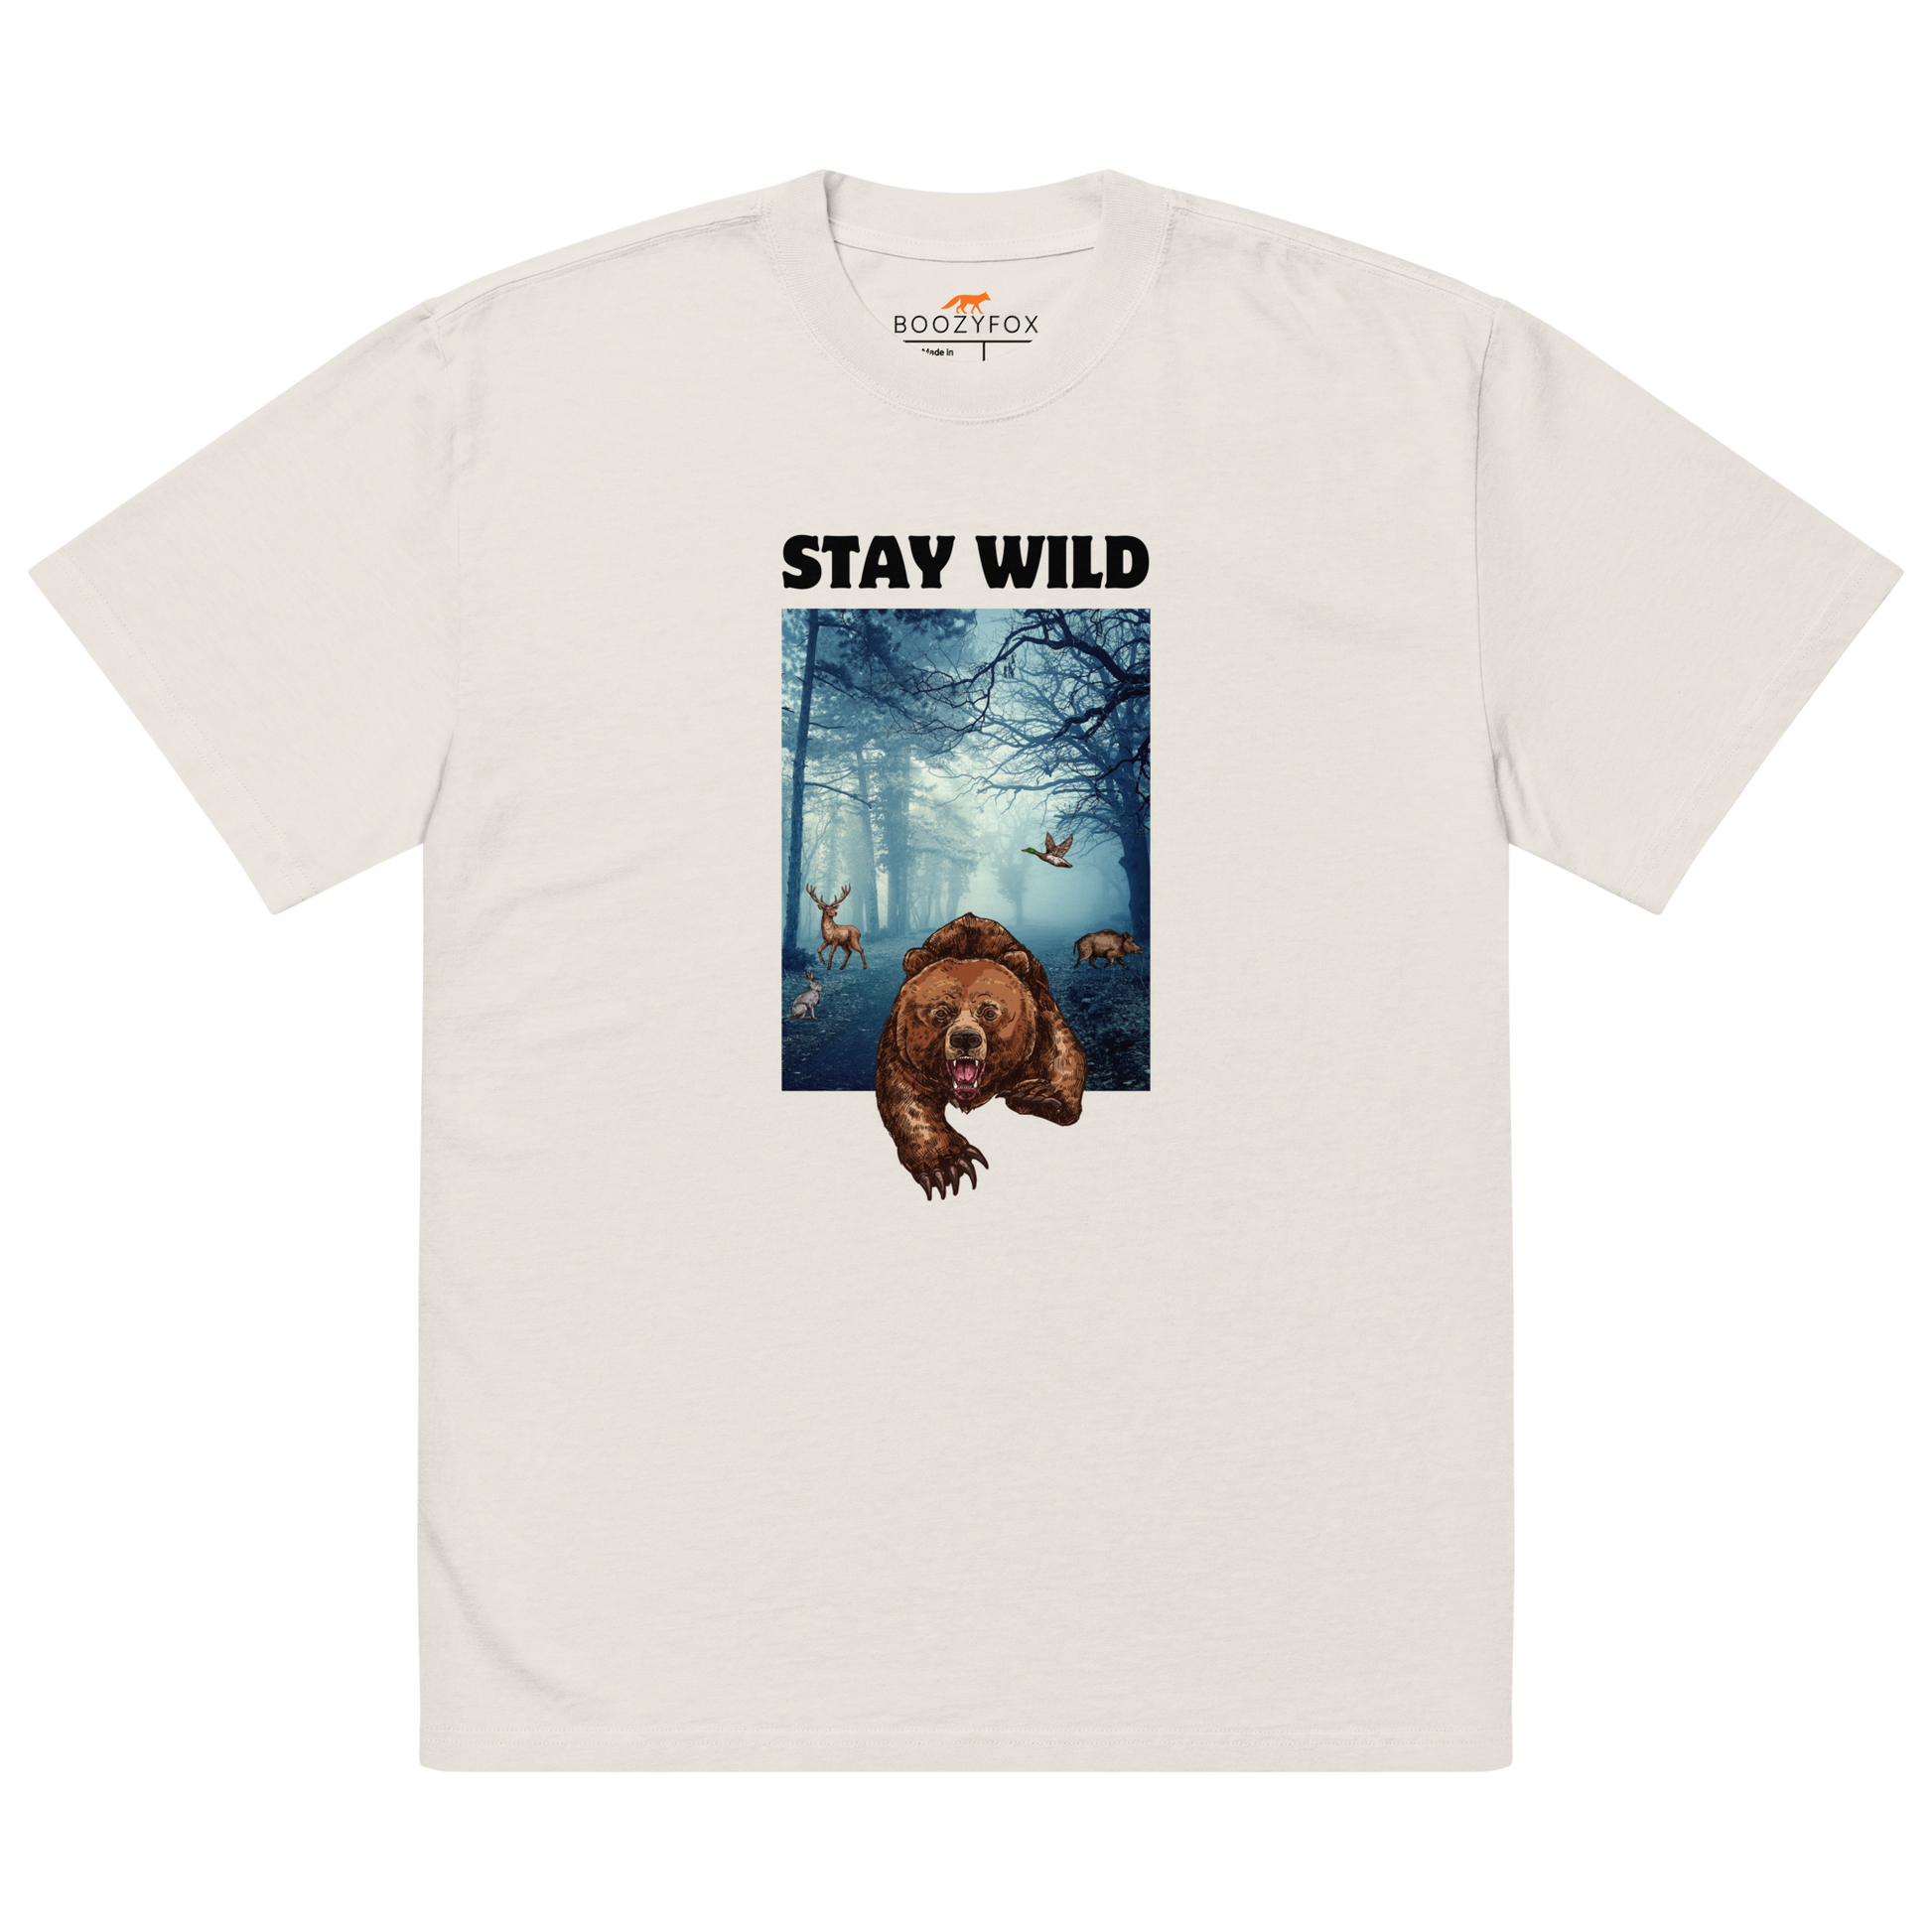 Faded Bone Bear Oversized T-Shirt featuring a Stay Wild graphic on the chest - Cool Graphic Bear Oversized Tees - Boozy Fox